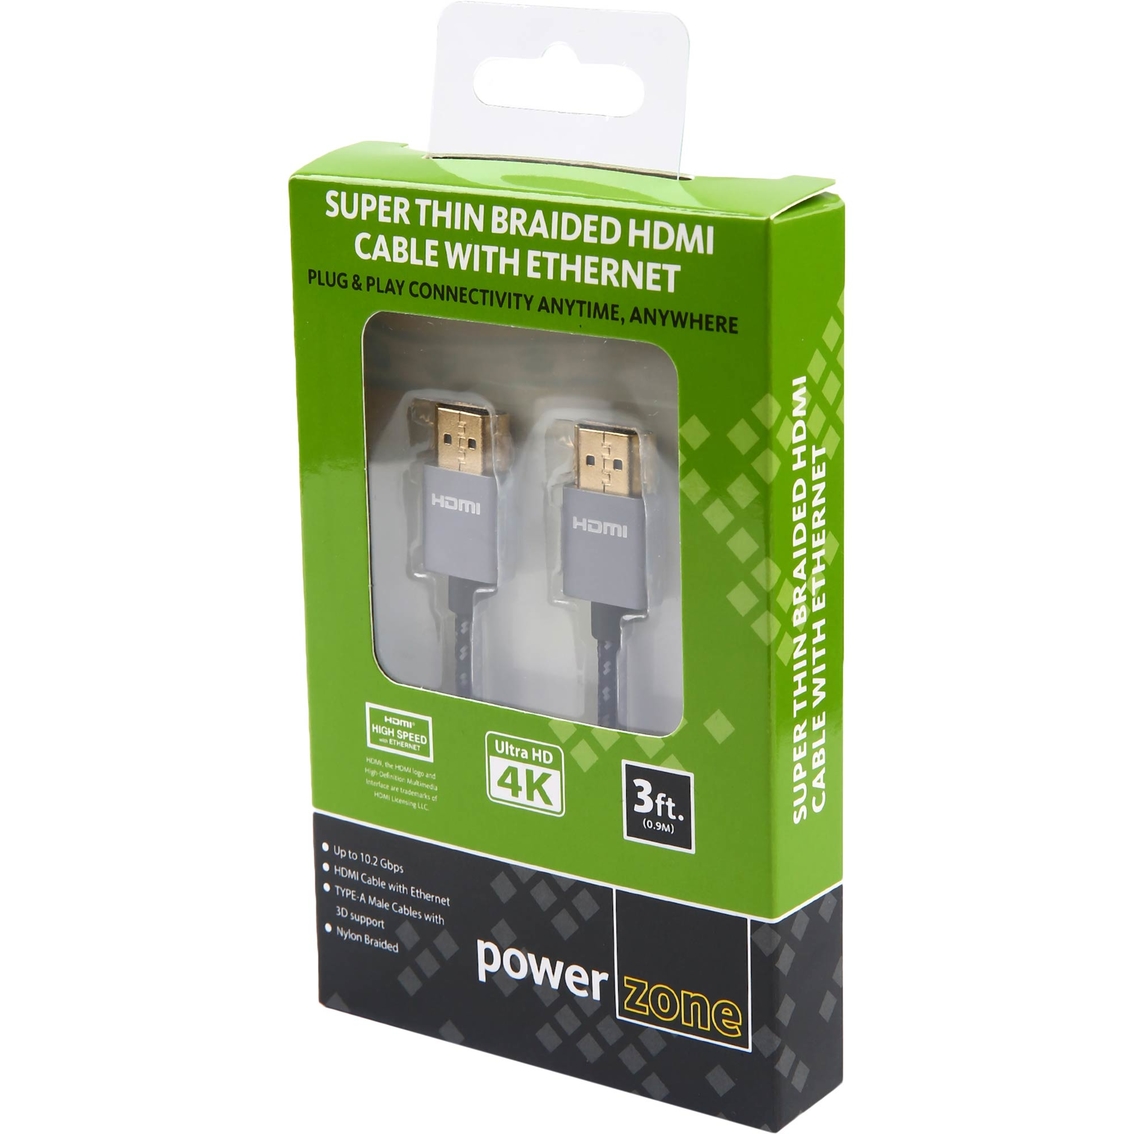 Powerzone Super Thin Braided HDMI Cable with Ethernet - Image 2 of 4